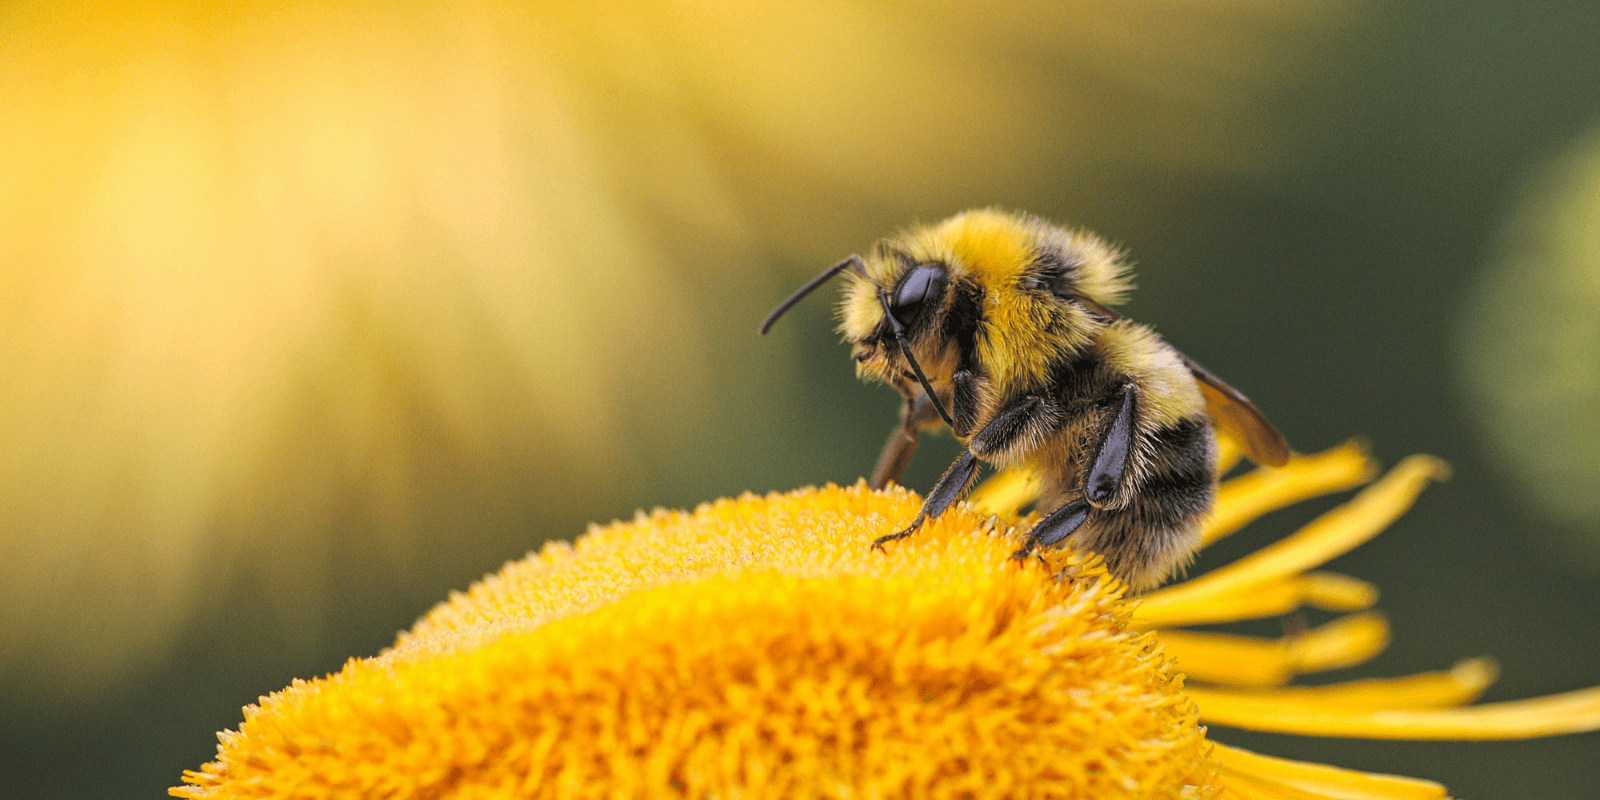 Close up photo of a bumble bee resting on a yellow flower